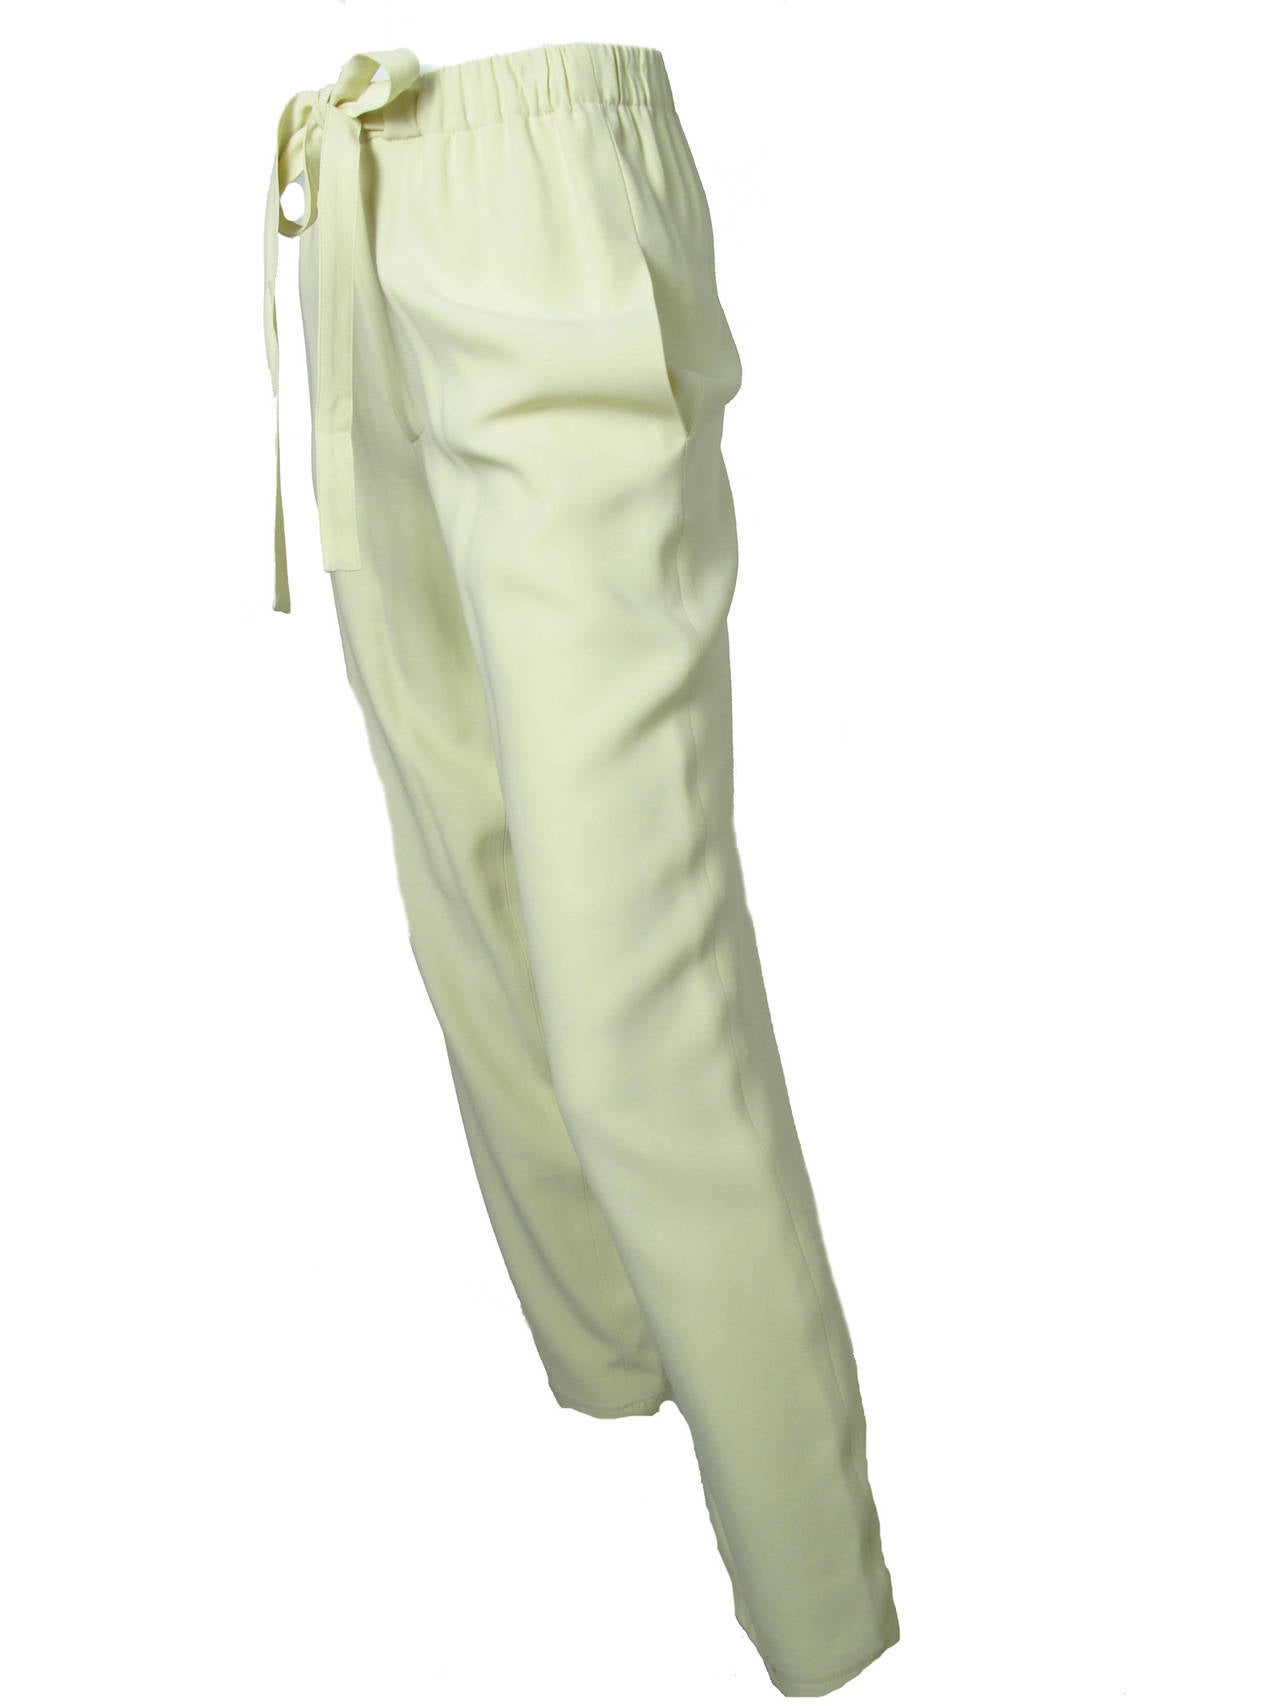 Moschino Couture creme drawstring pants with pockets.  Acetate and Rayon fabric. 25